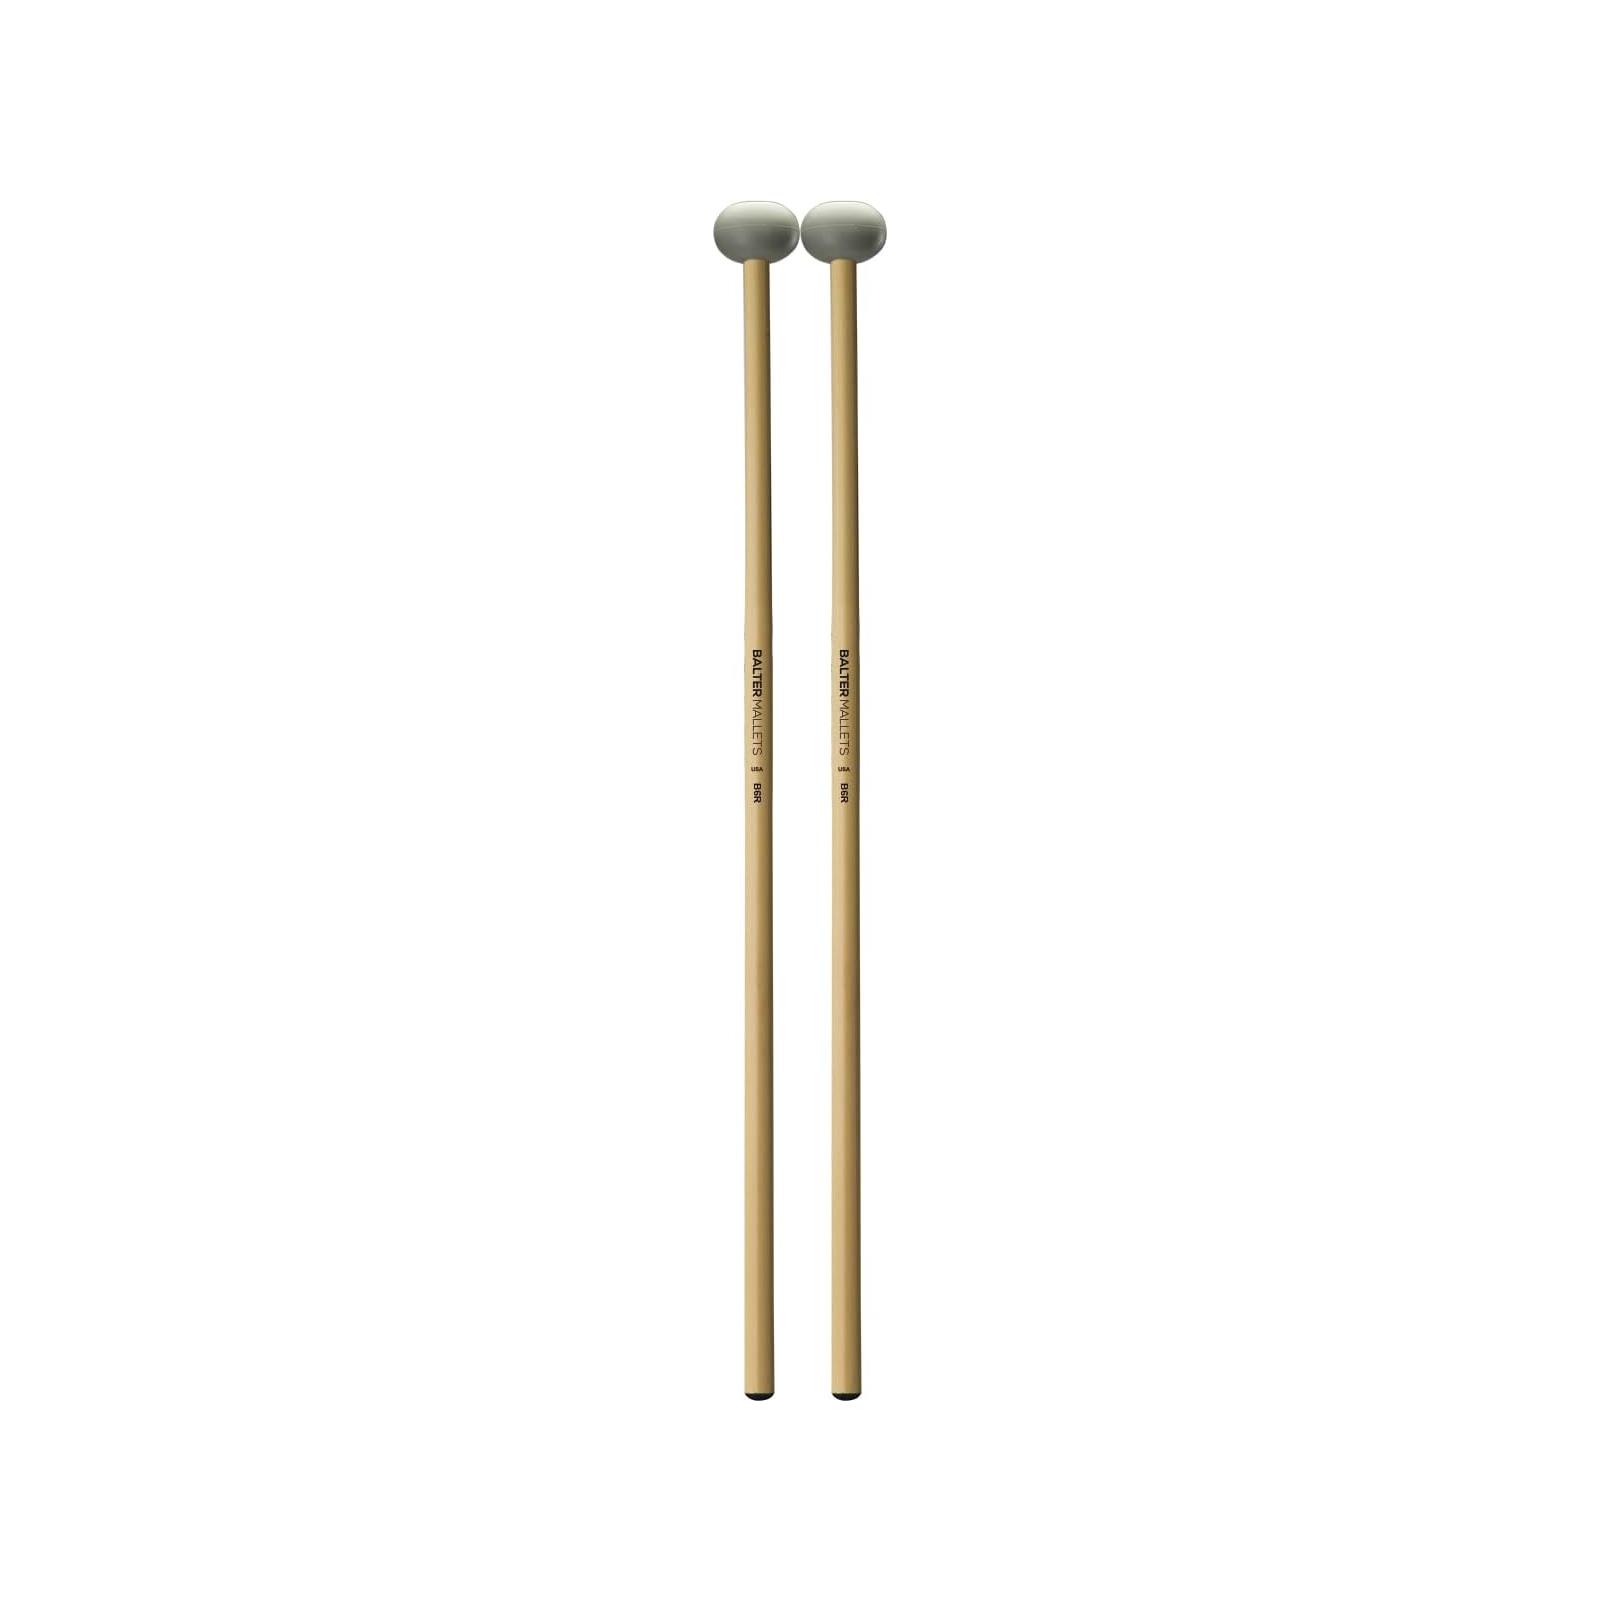 Mike Balter Mallet, Oval Grey Rubber, Hard, RTN